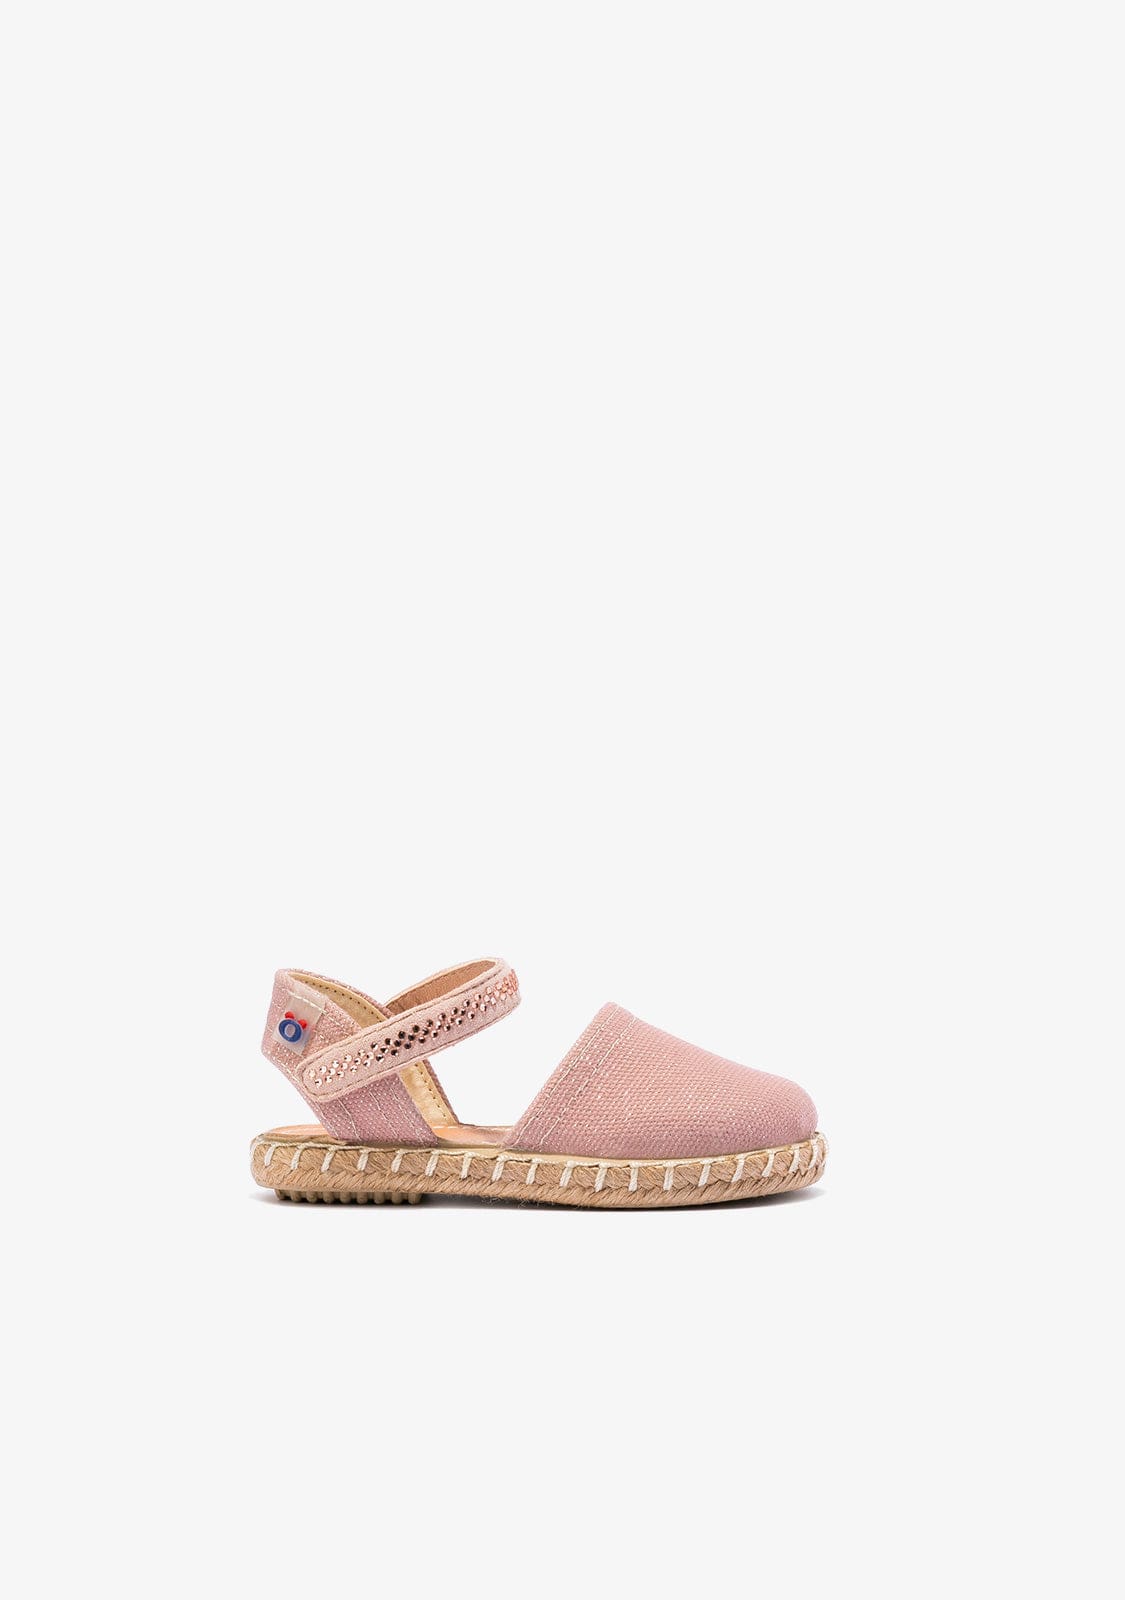 OSITO Shoes Baby's Pink Adherent Strip Espadrilles